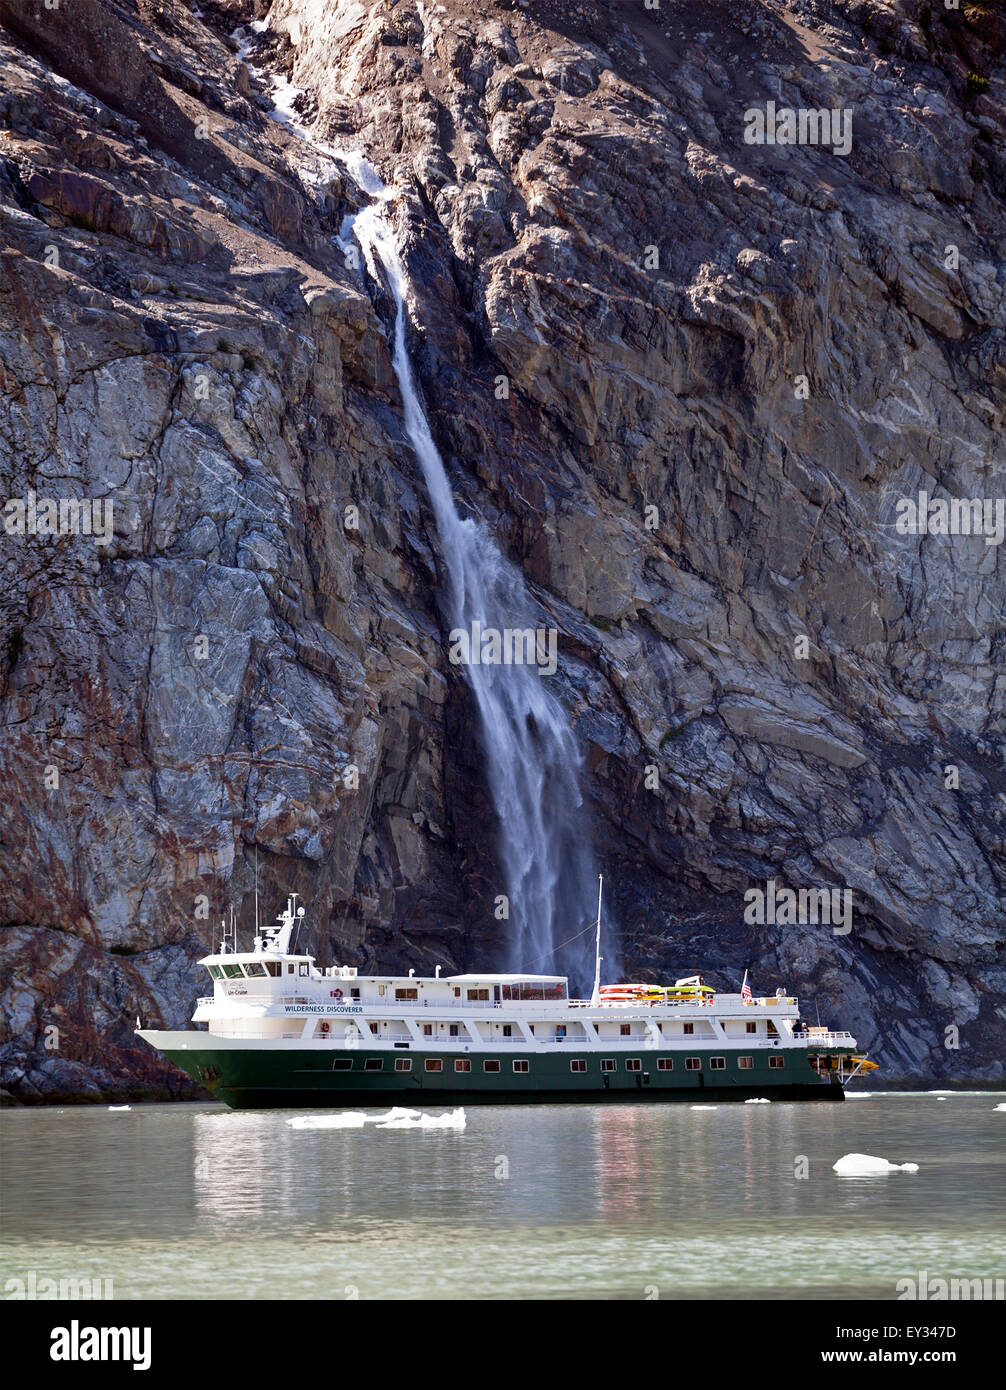 A cruise ship owned by UnCruise Adventures travels near a waterfall in the Inside Passage of Alaska between Juneau and Ketchikan. Stock Photo